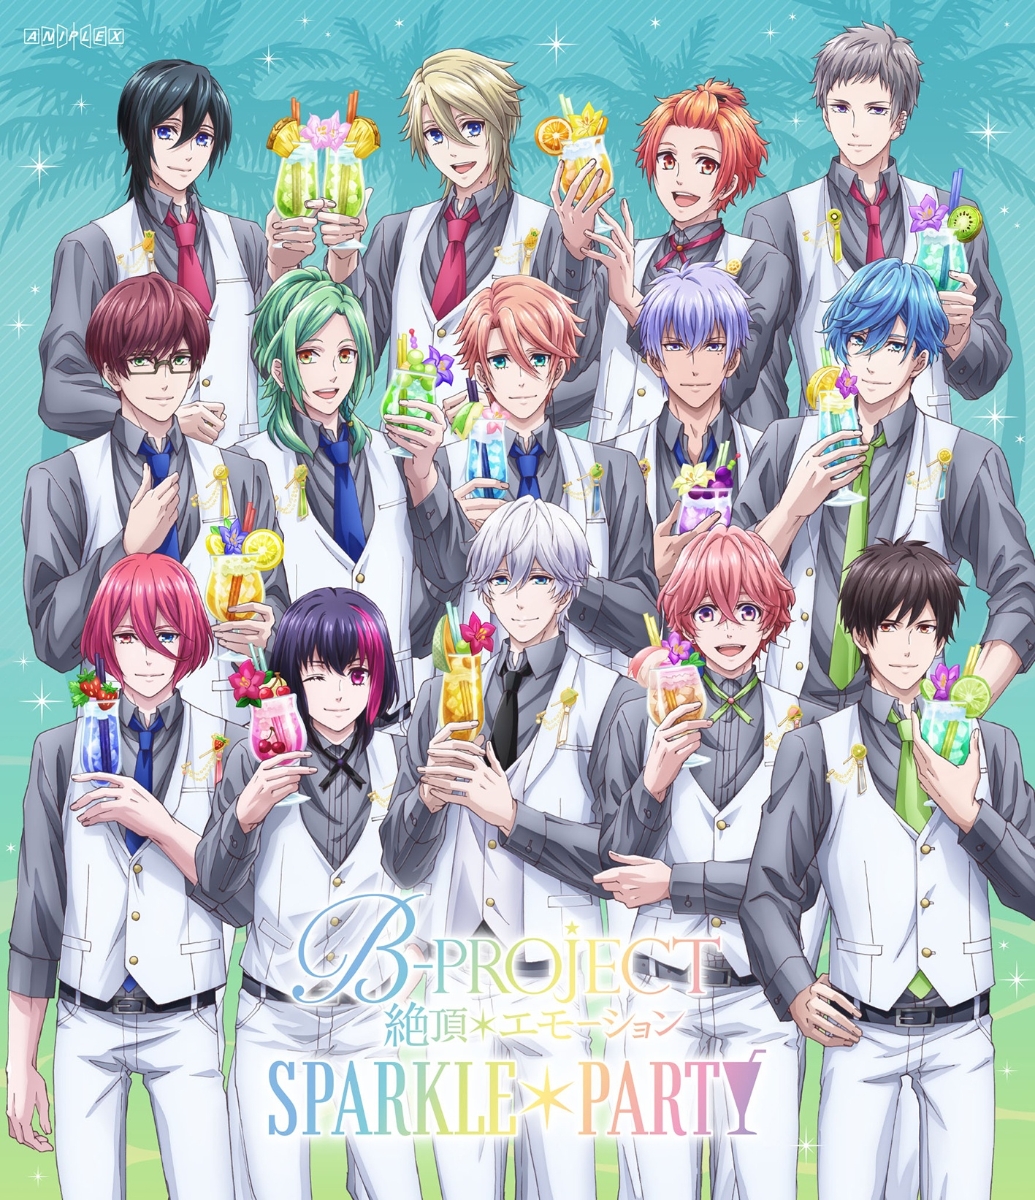 B-PROJECT～絶頂＊エモーション～ SPARKLE＊PARTY(完全生産限定版)【Blu-ray】 [ 小野大輔 ]画像